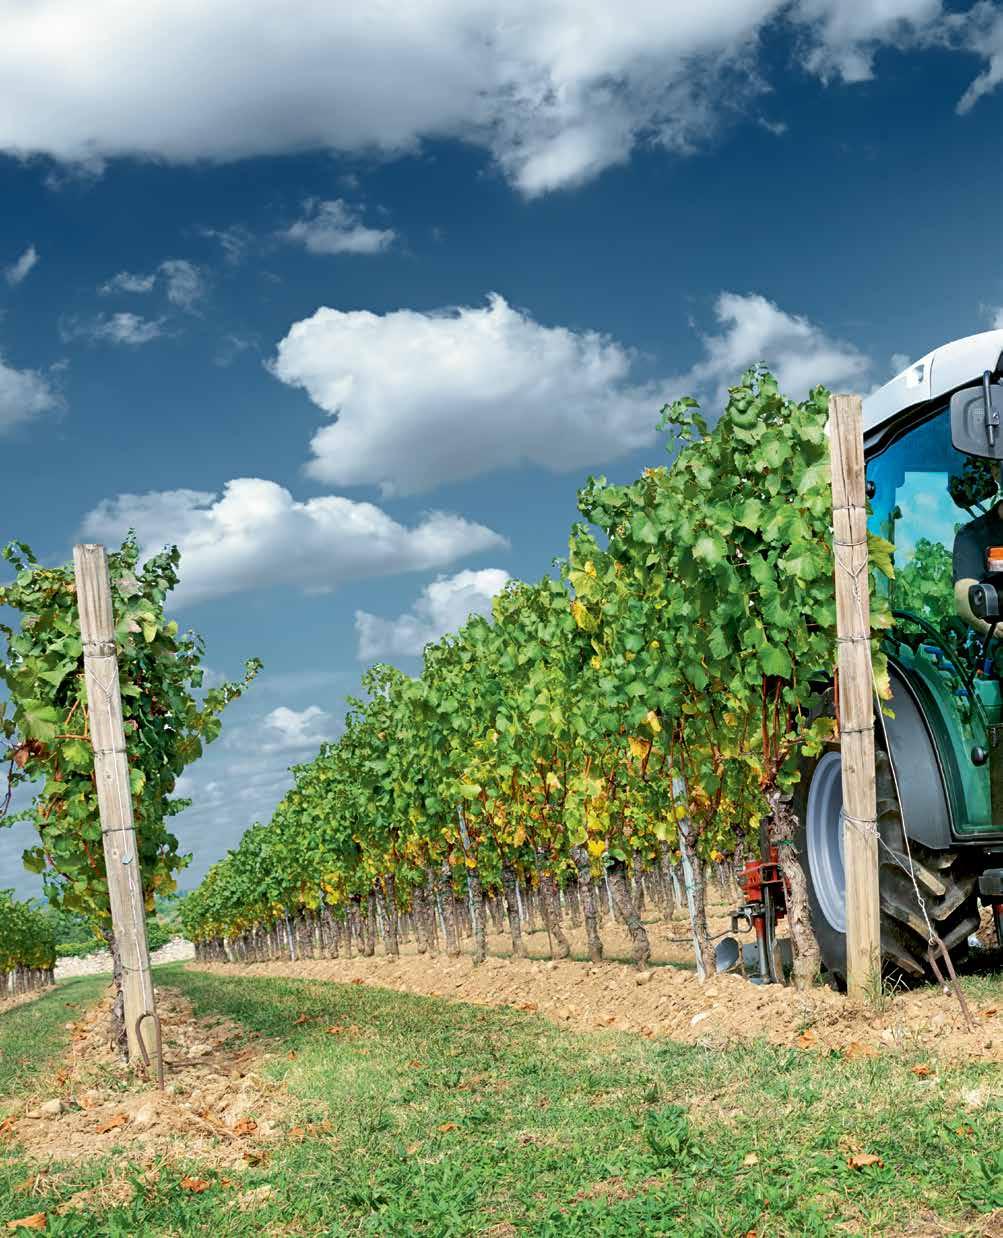 04-05 AXLES AND BRAKES MECHANISATION IN VINEYARDS CONTINUES TO SPEED UP. SAVE COSTS? BECOME LESS DEPENDENT ON EXTERNAL WORKERS?